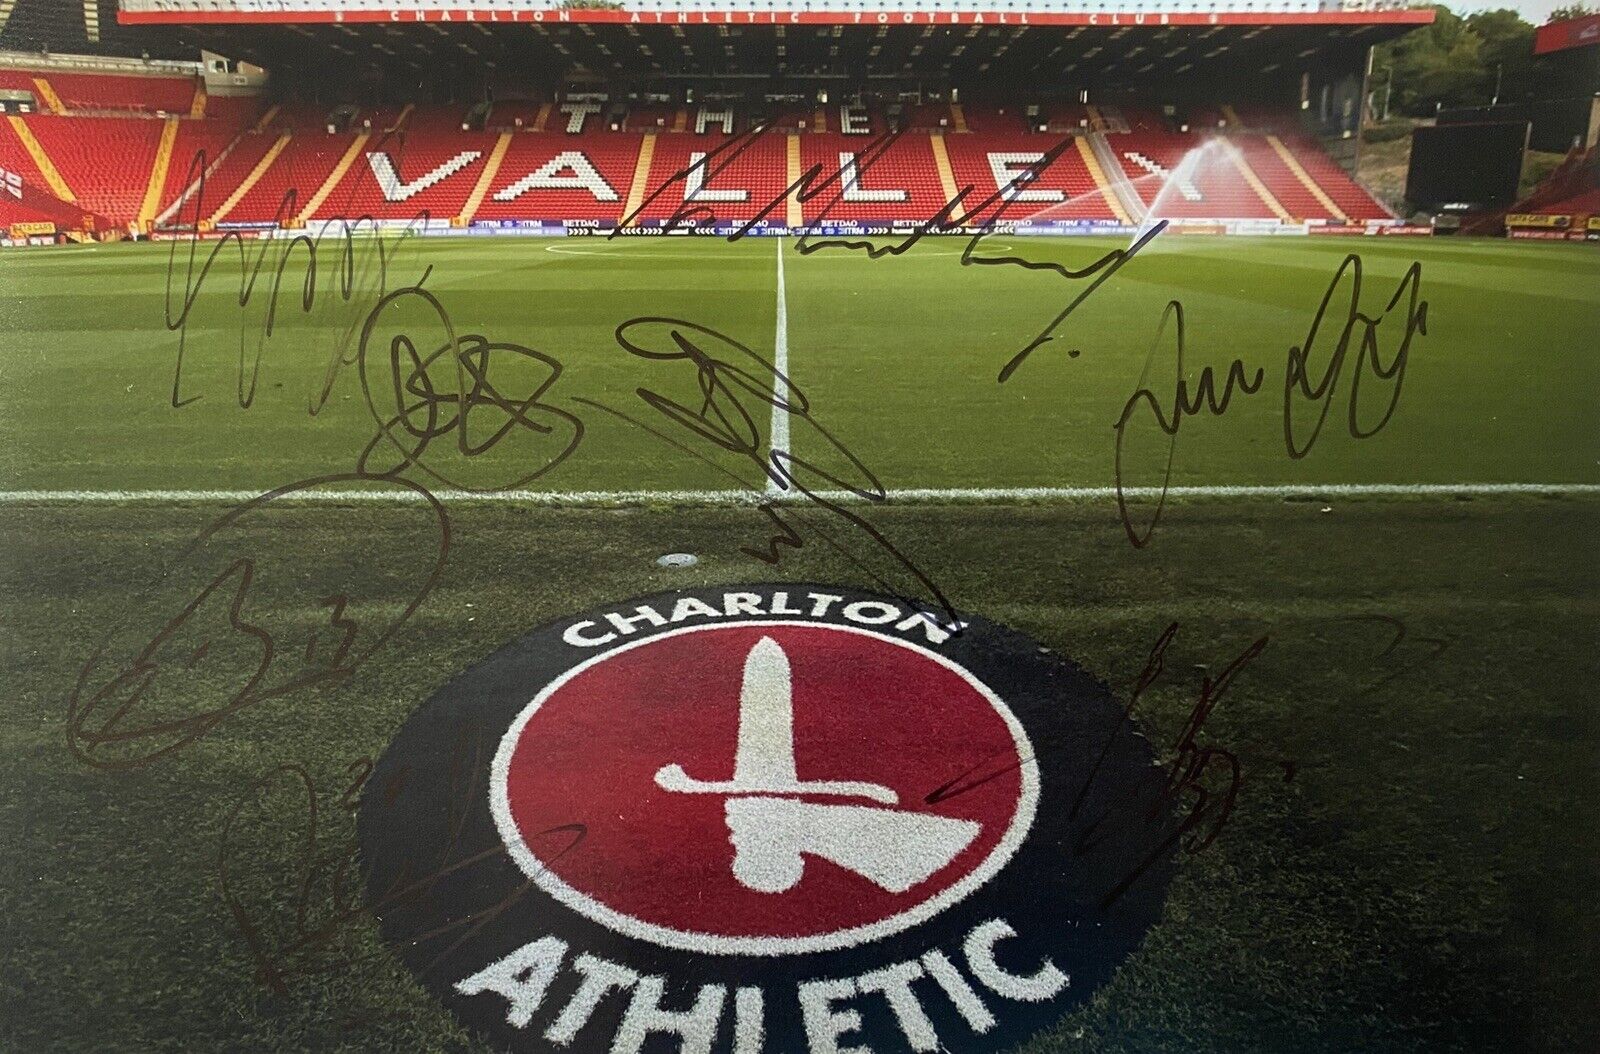 Charlton Athletic A4 Photo Poster painting Signed By 20/21 Squad, Amos, Gunter, Bogle, See Proof